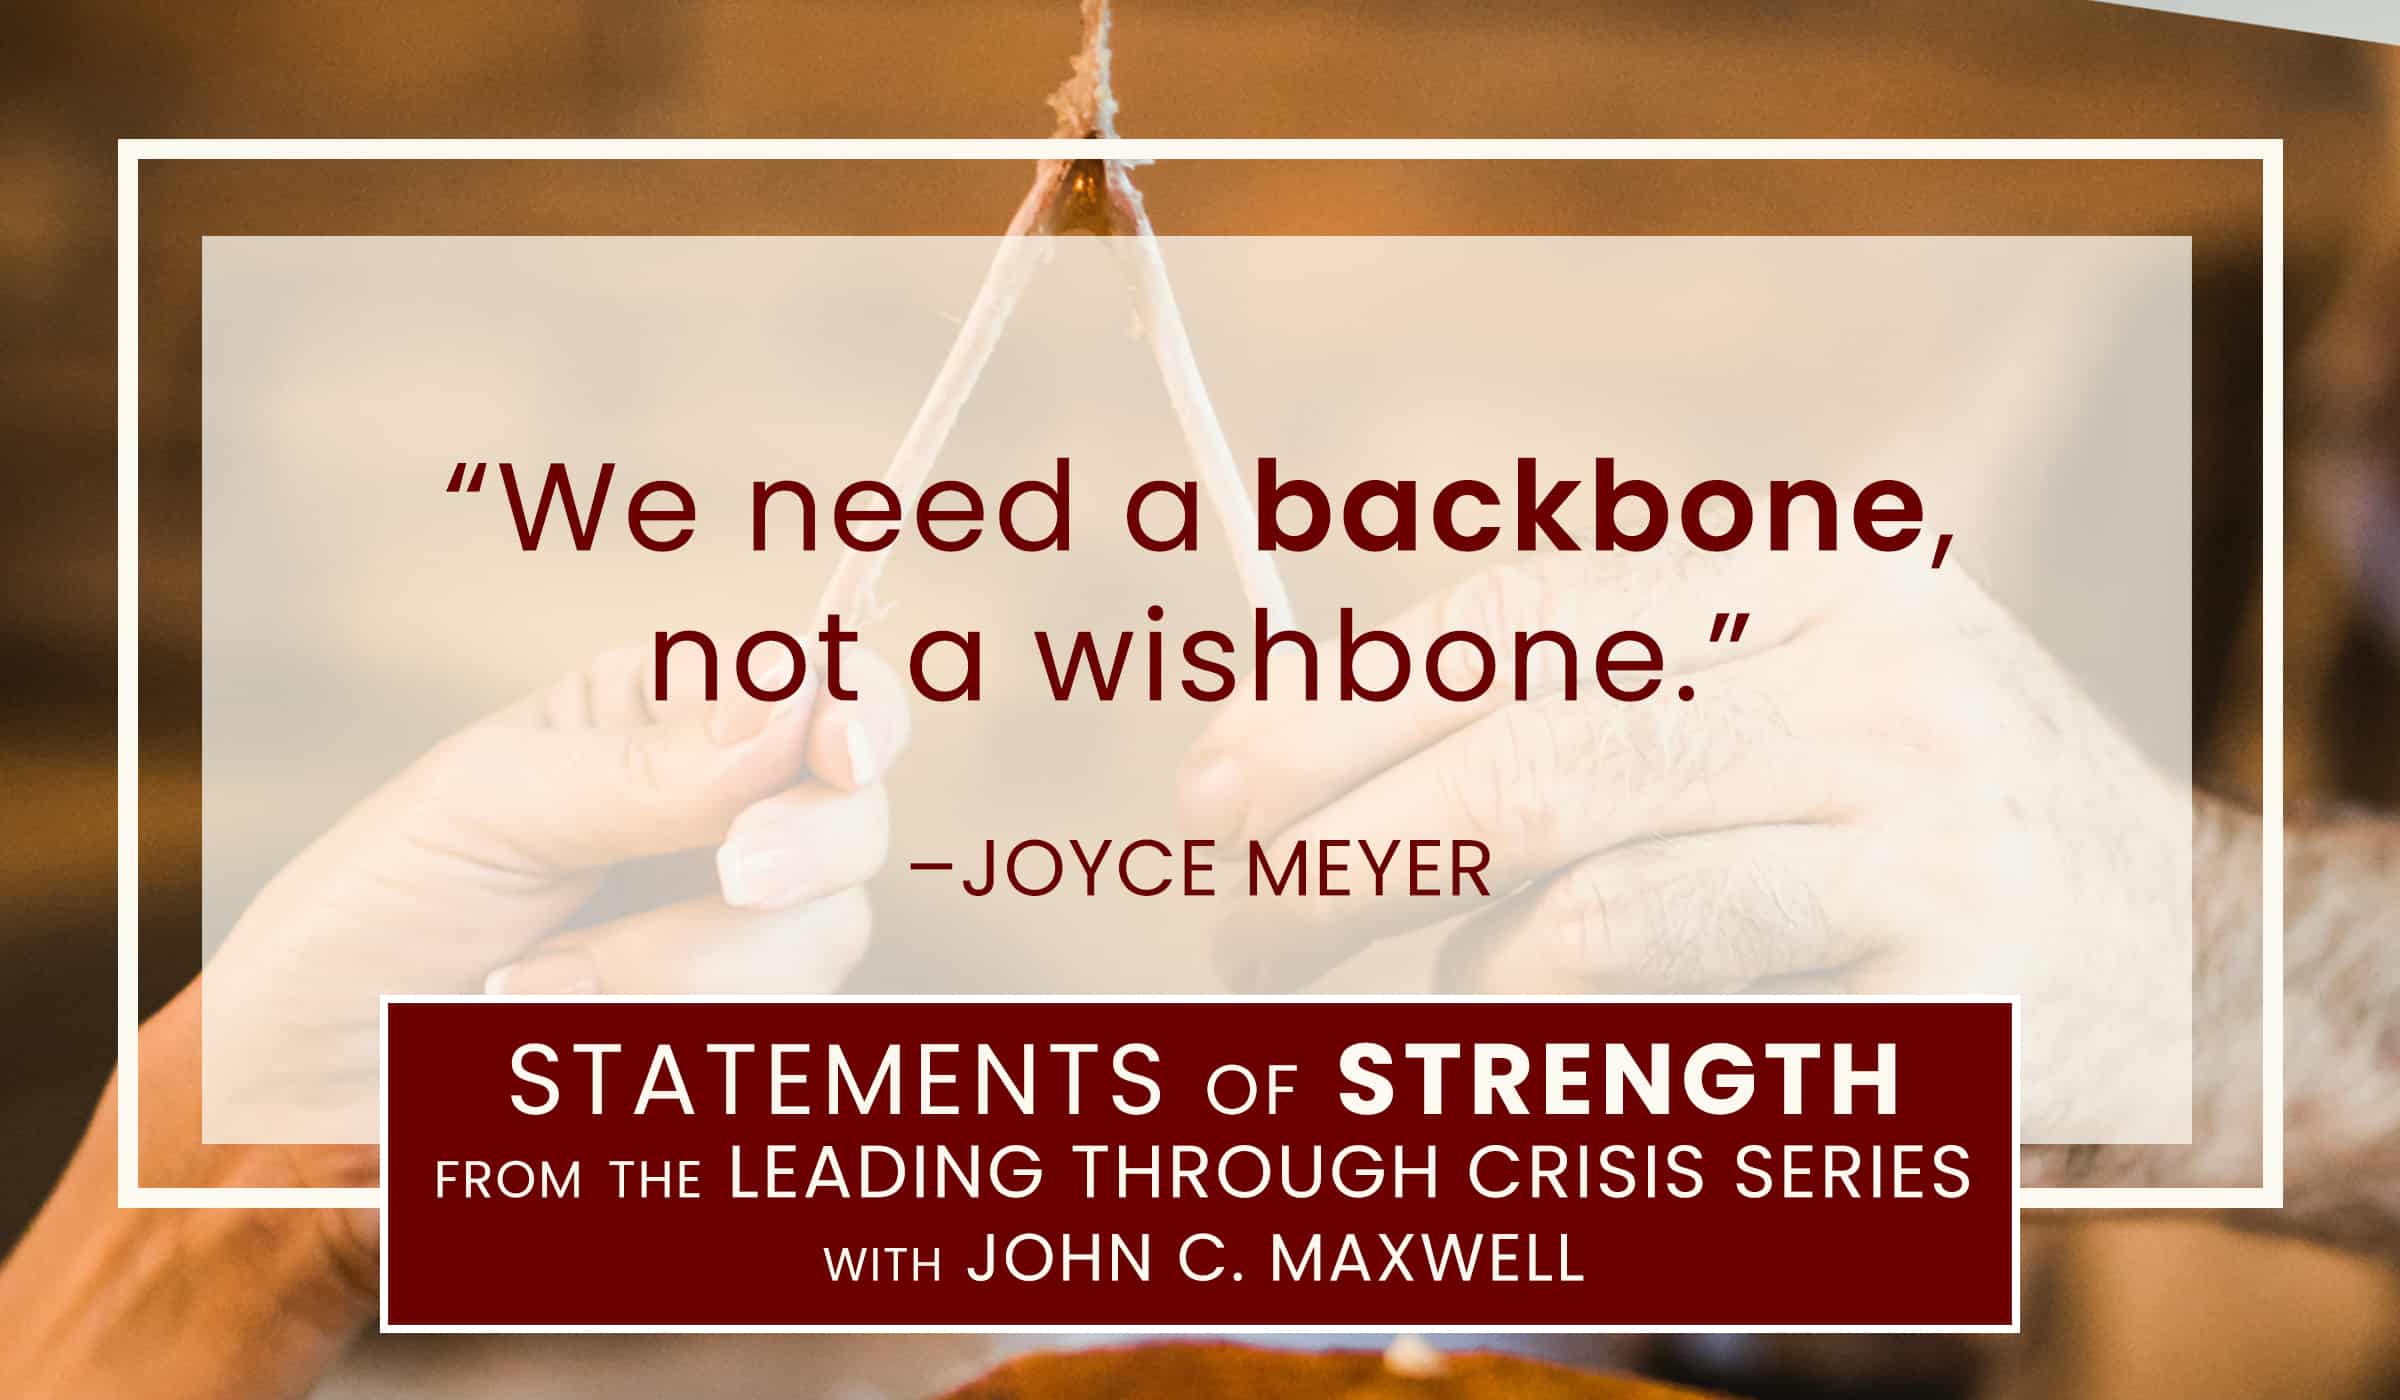 picture of quotation image with quote text from Joyce Meyer